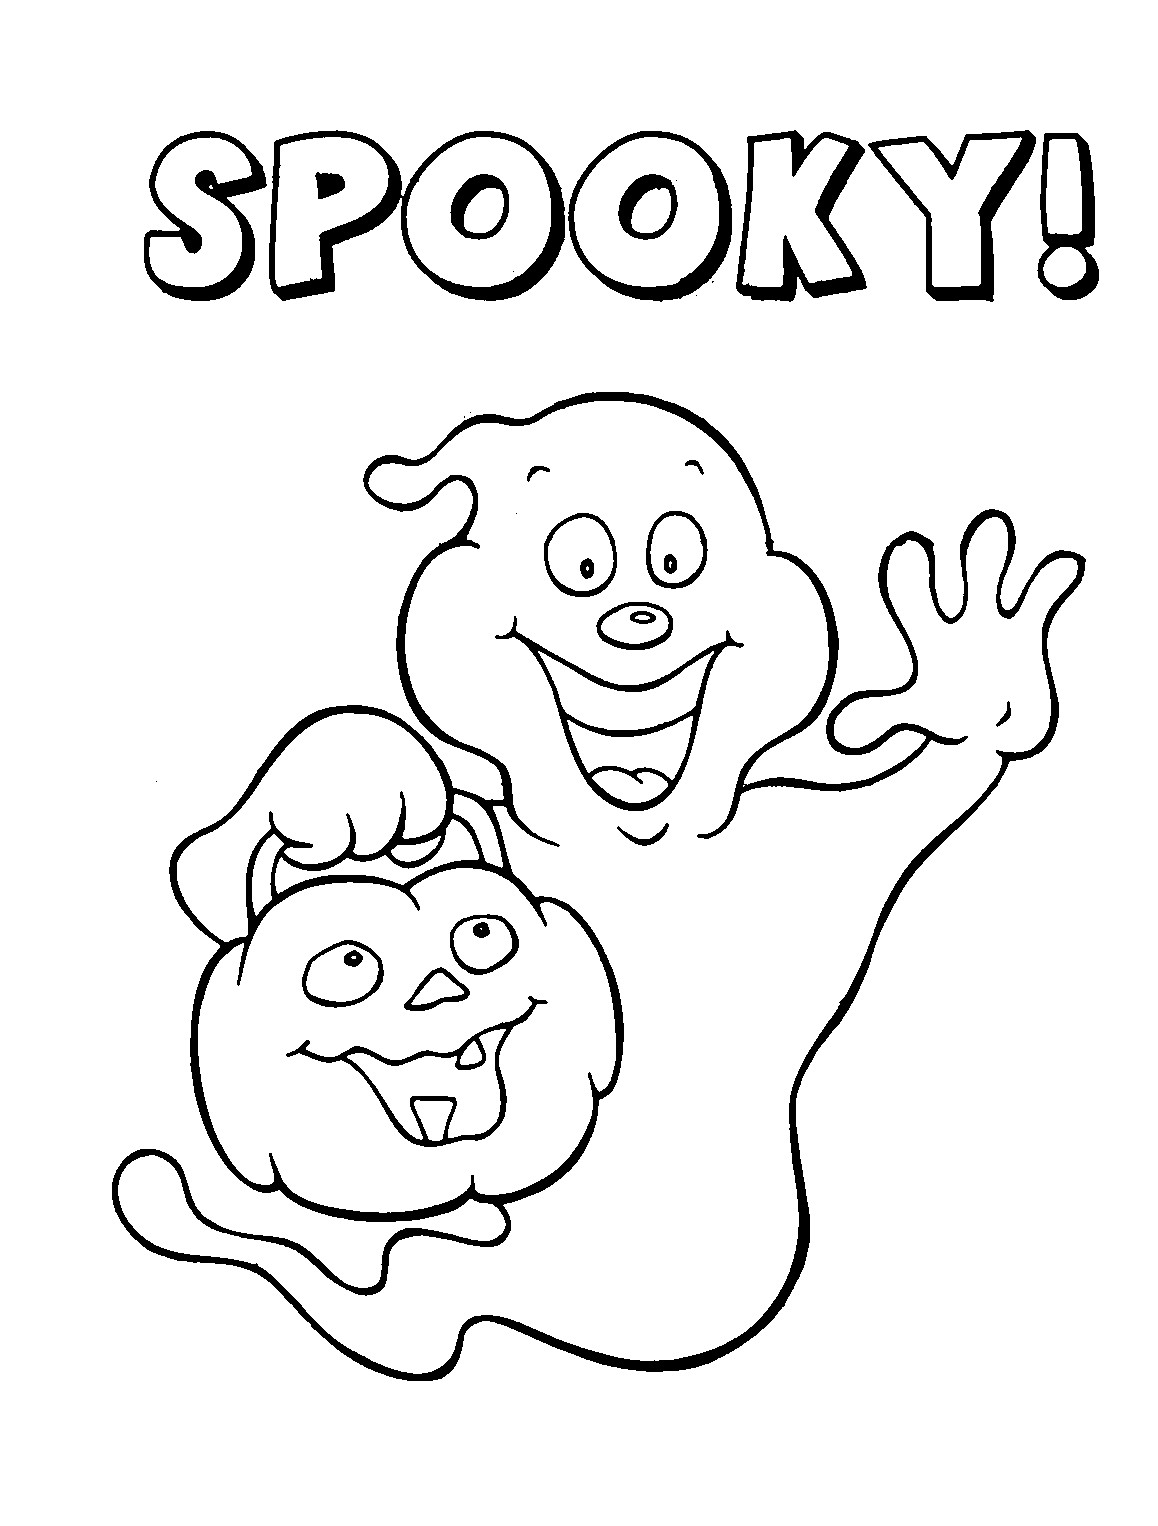 Printable Coloring Pages Halloween
 50 Free Printable Halloween Coloring Pages For Kids